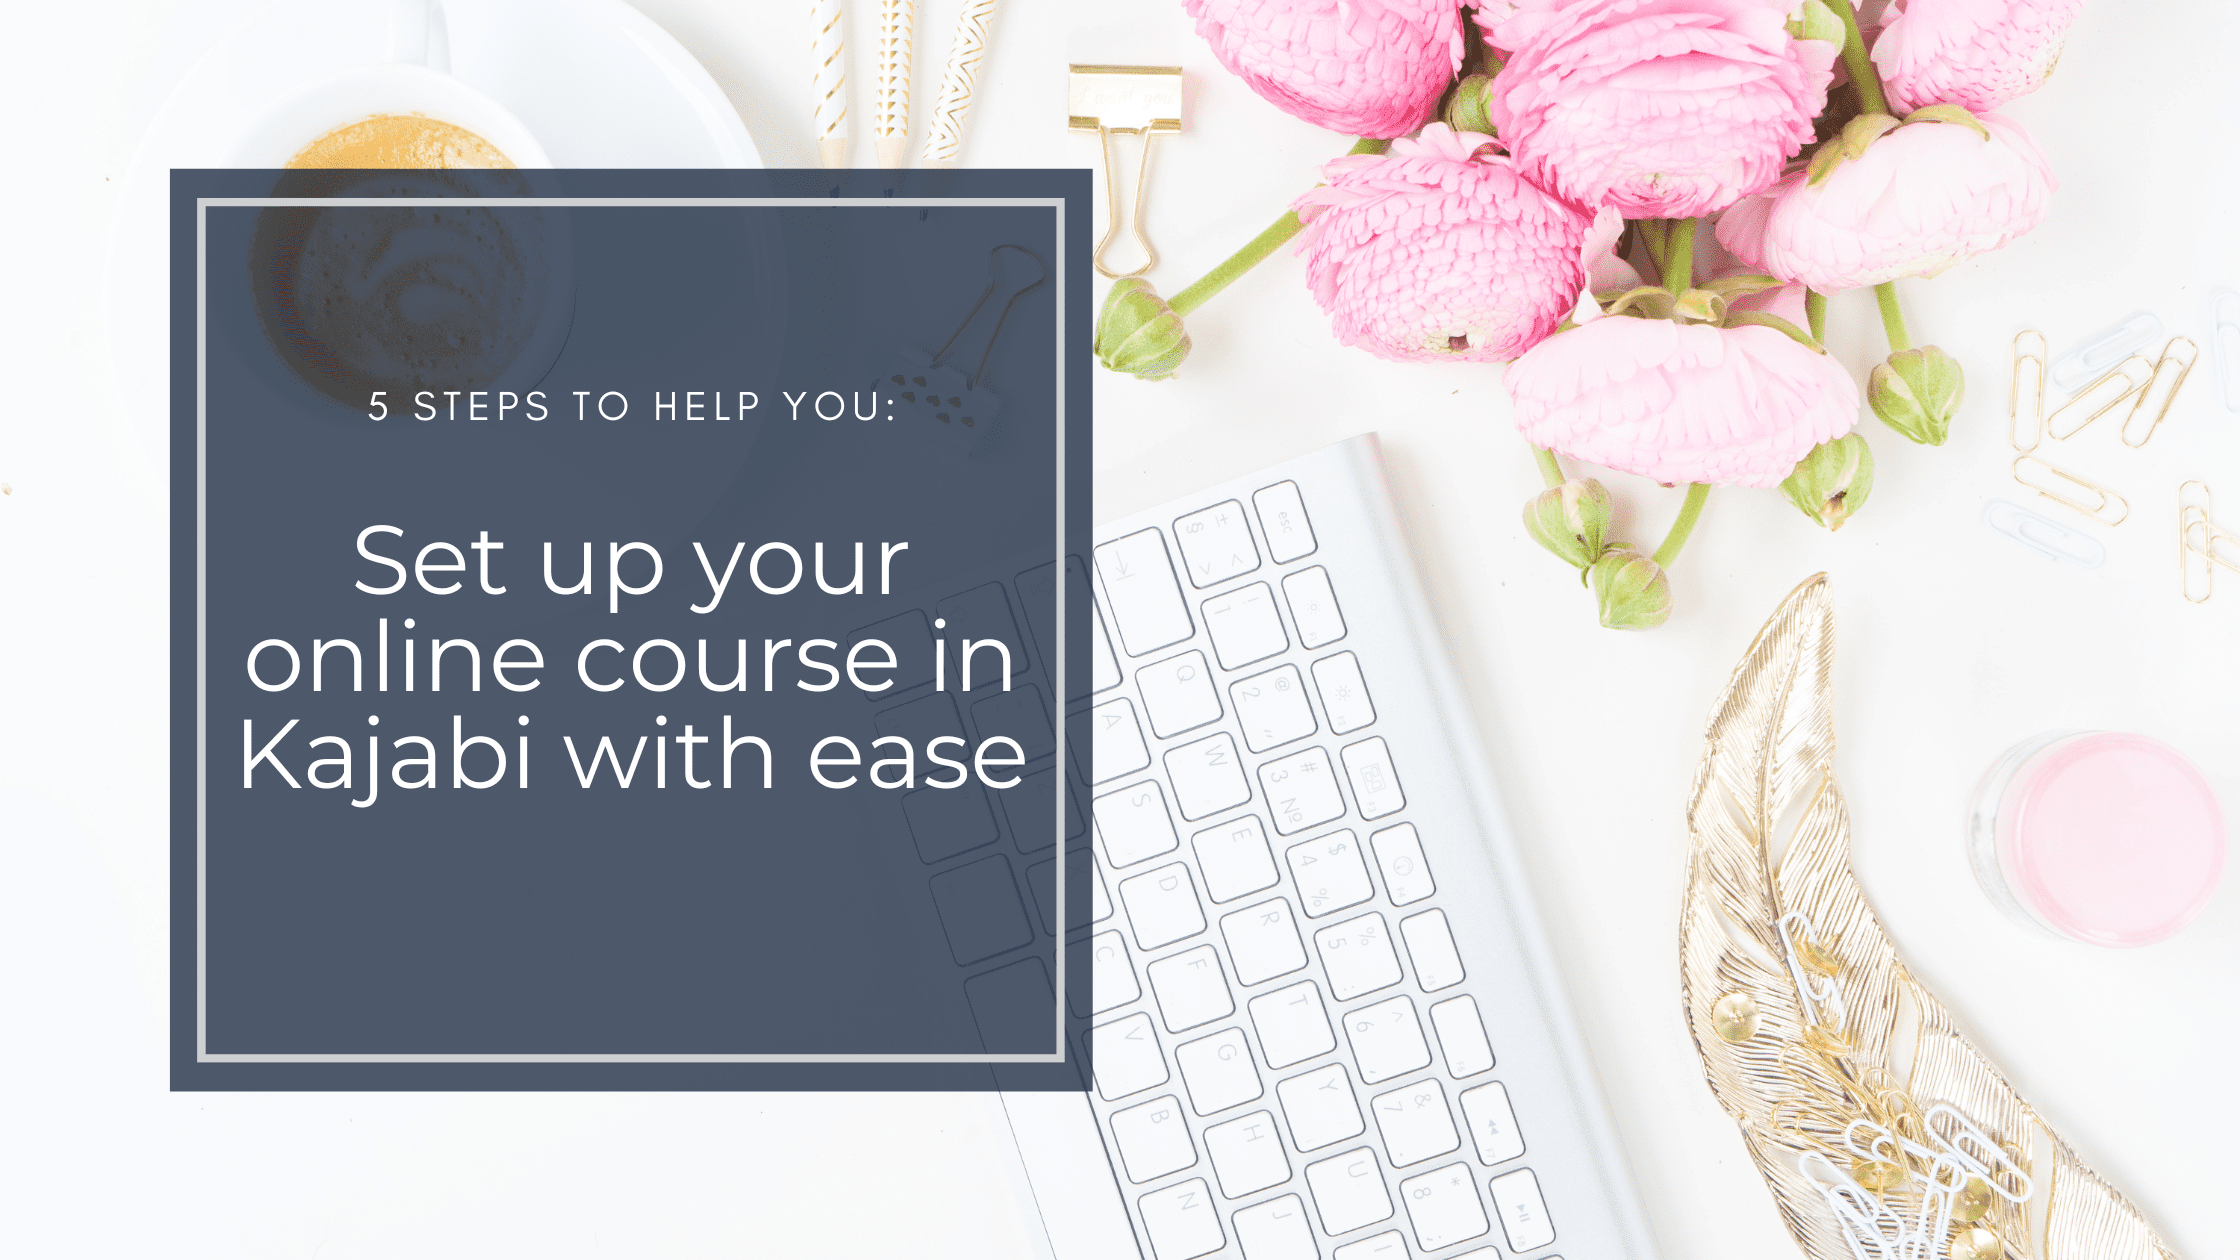 Five Tips to Help You Set Up Your Online Course in Kajabi